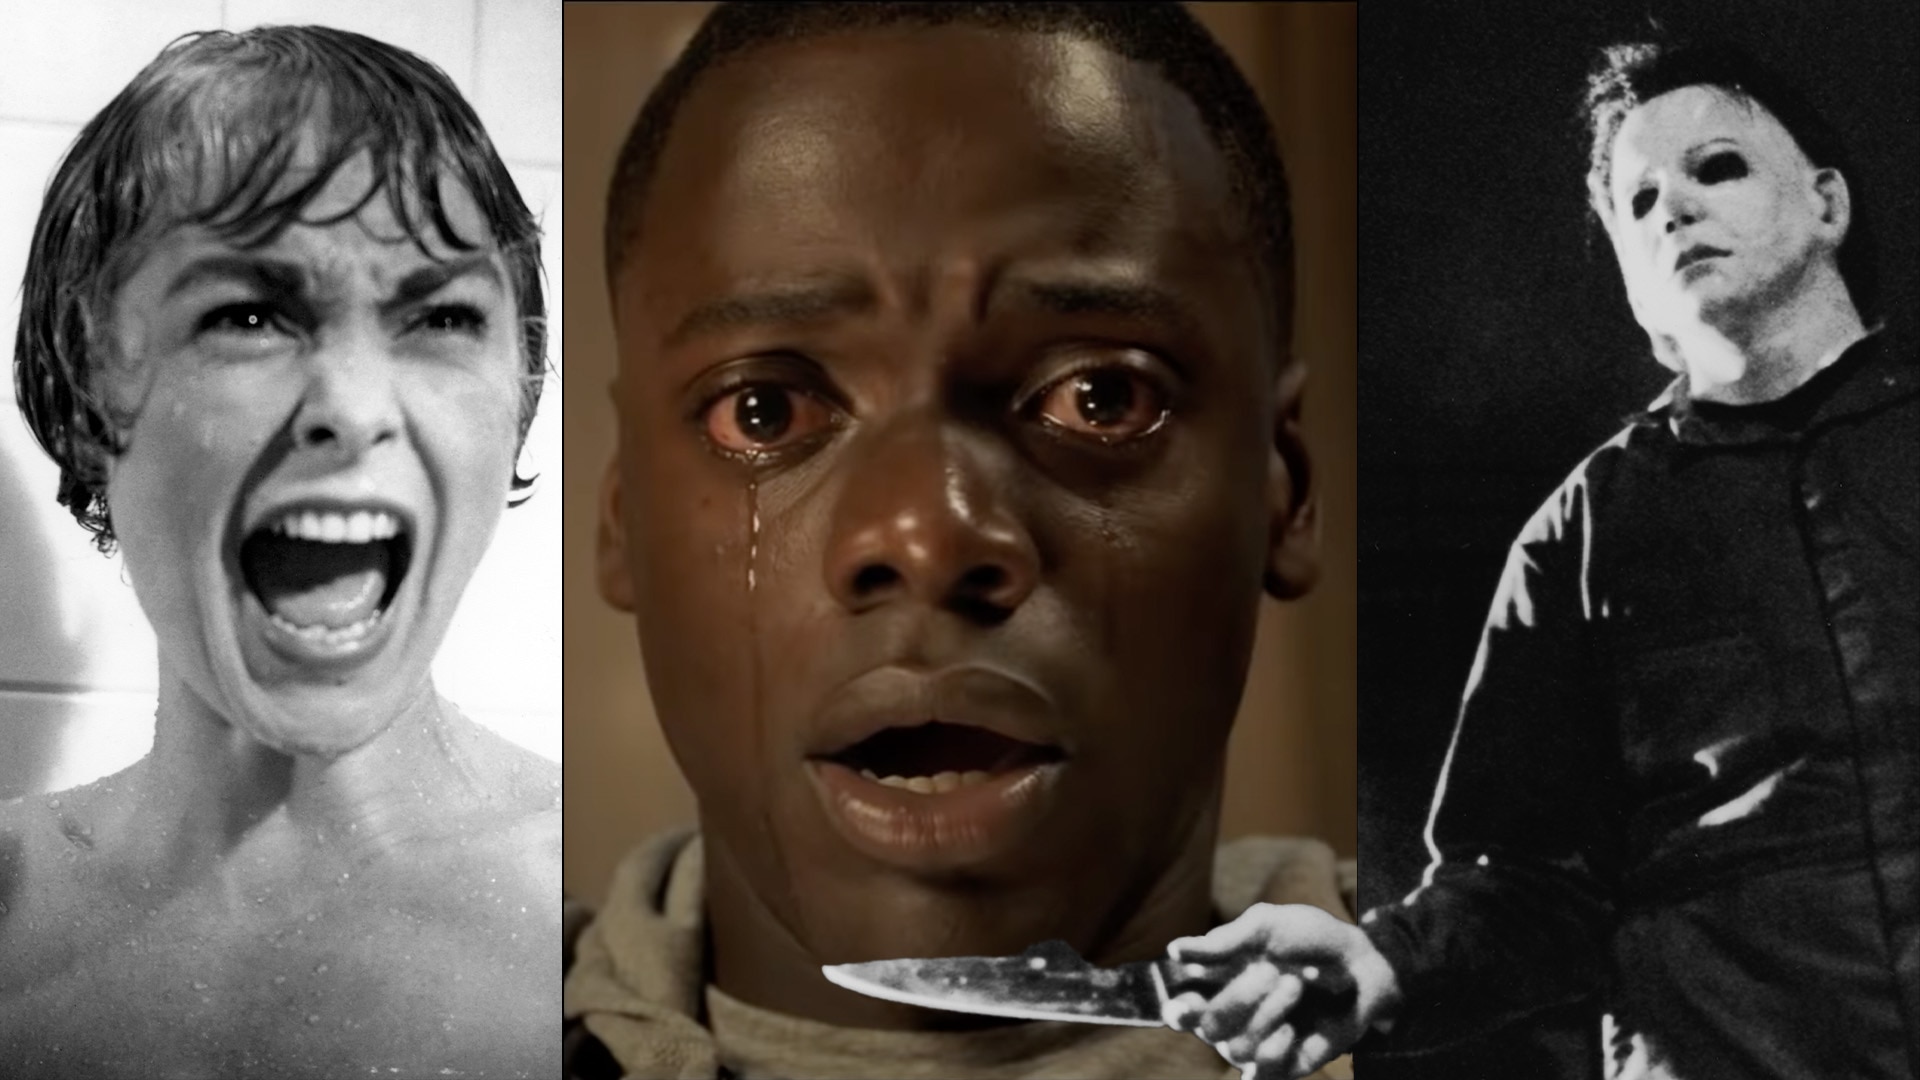 (L-R) Psycho (1960), Get Out (2017), Halloween (1978)